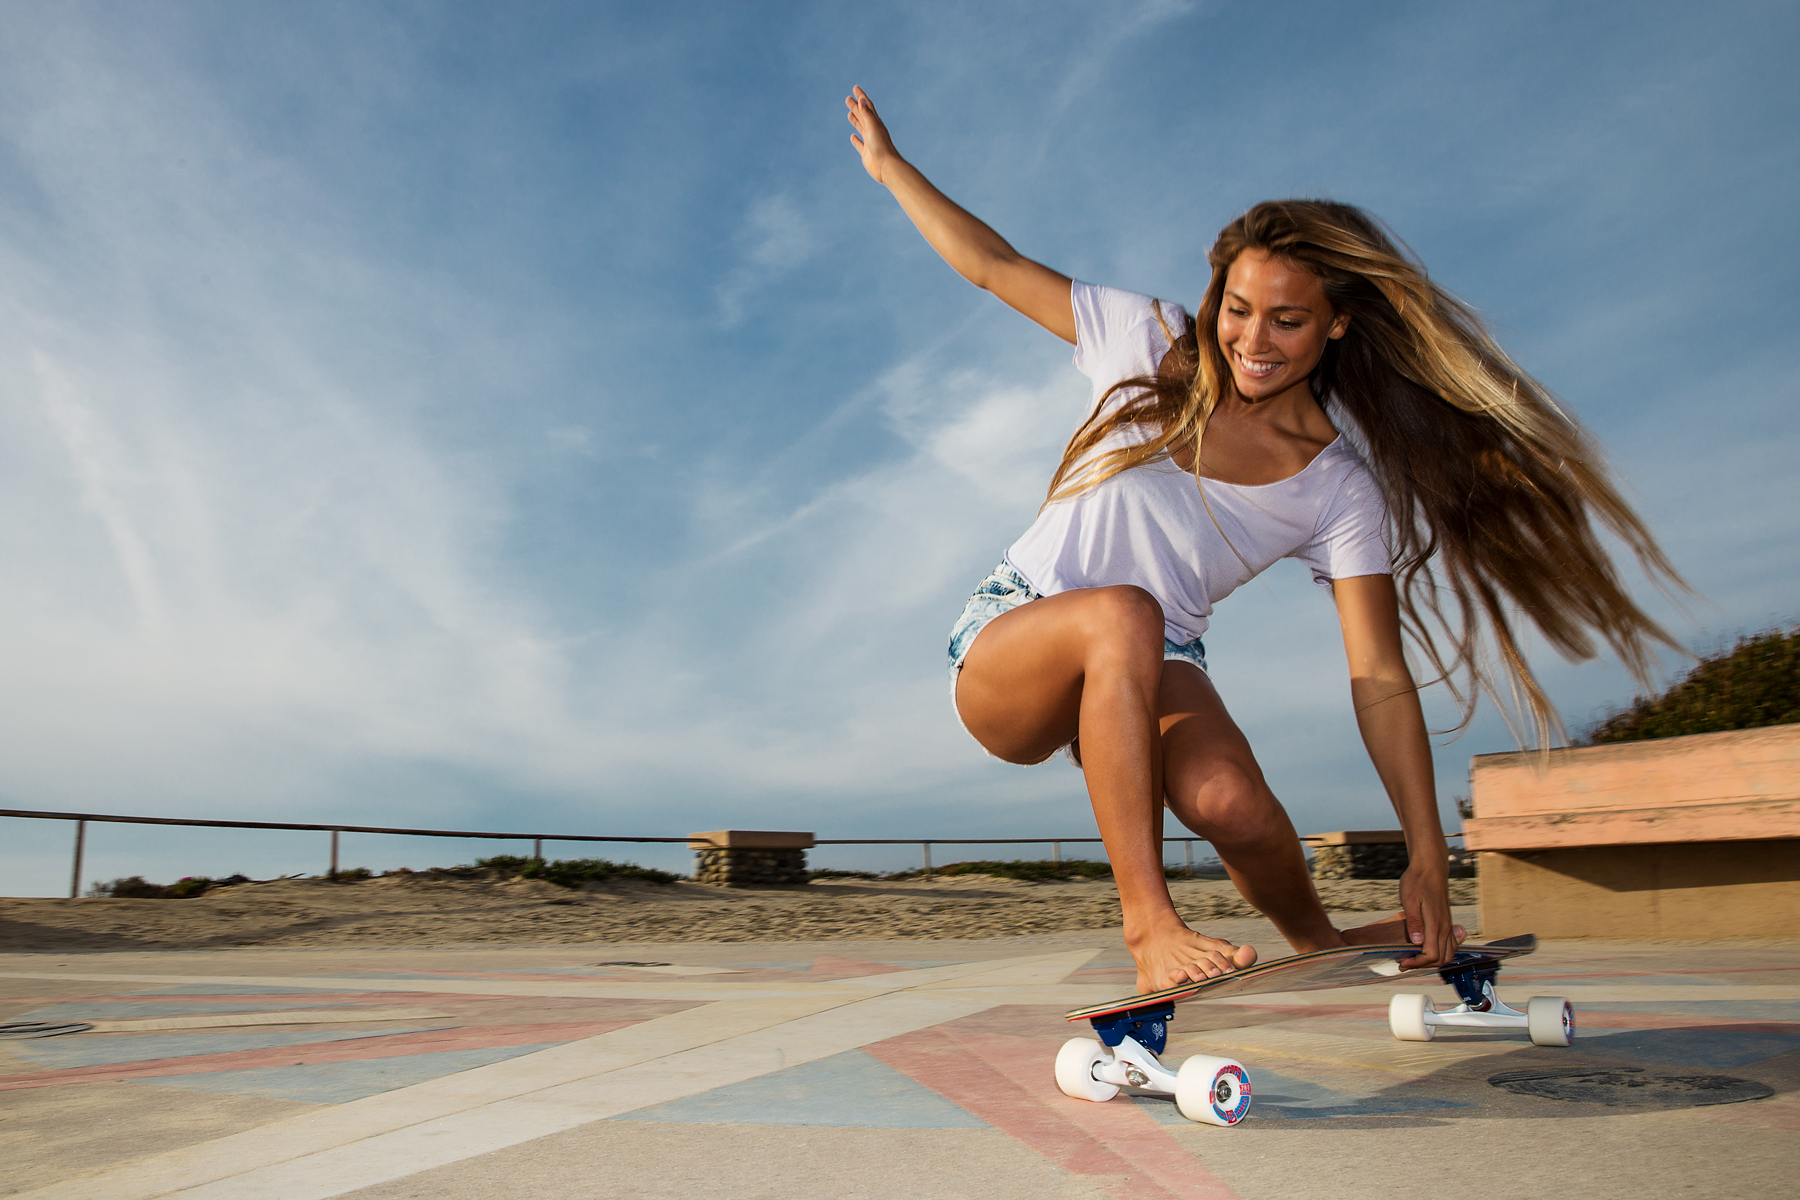 Nothing hotter than seeing a chick on a skateboard, especially barefoot. 